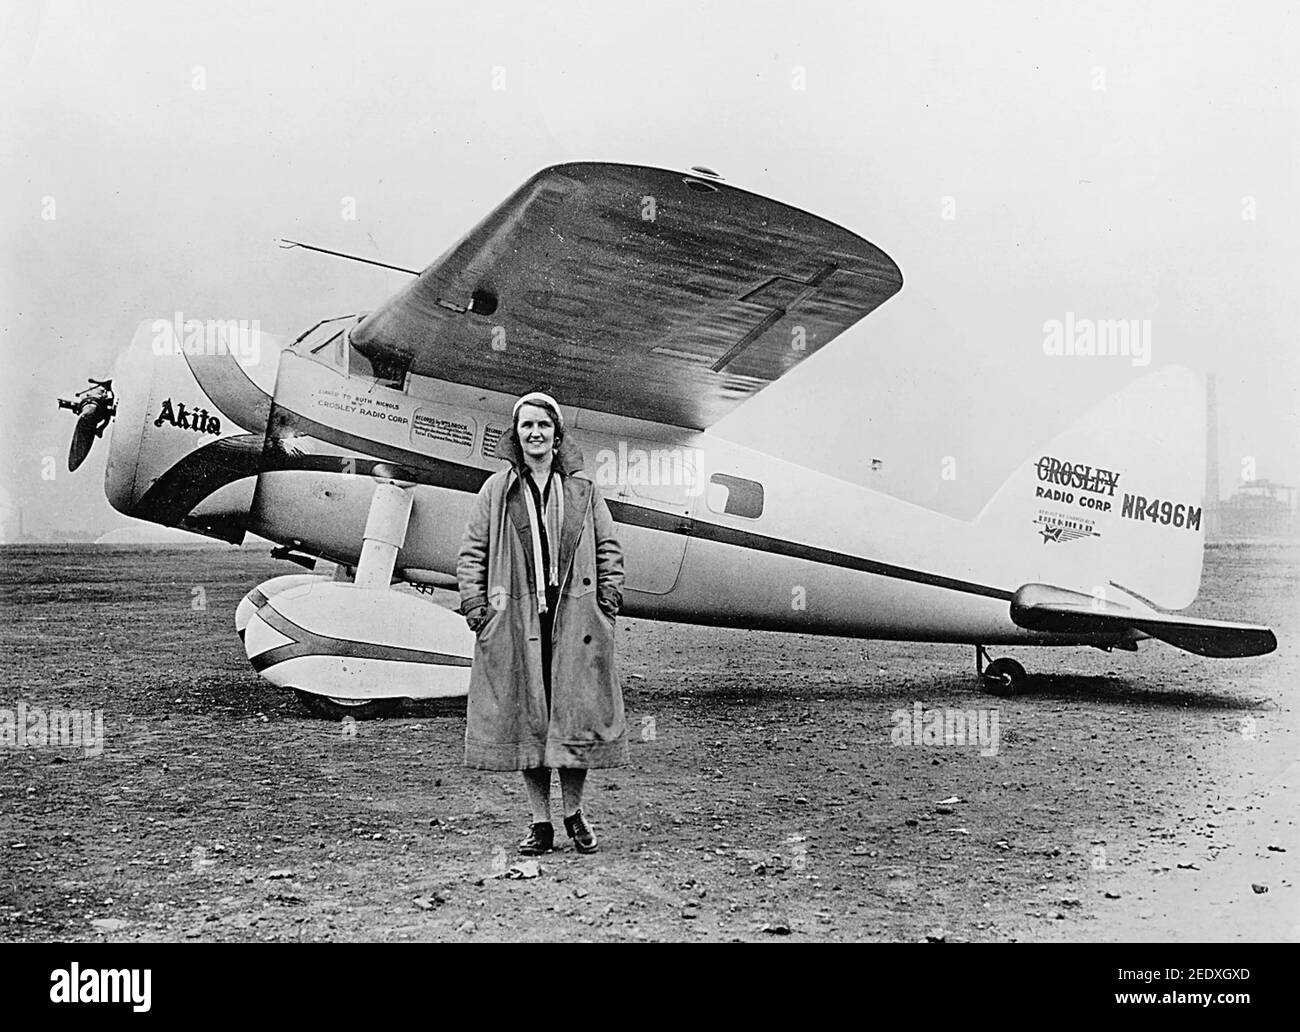 RUTH NICHOLS (1901-1960) American aviation pioneer with her 1928 Lockheed Vega 5 - NR496M - owned by the founder of the Crosley Radio Corp as noted on the tail. Photo about 1932 Stock Photo